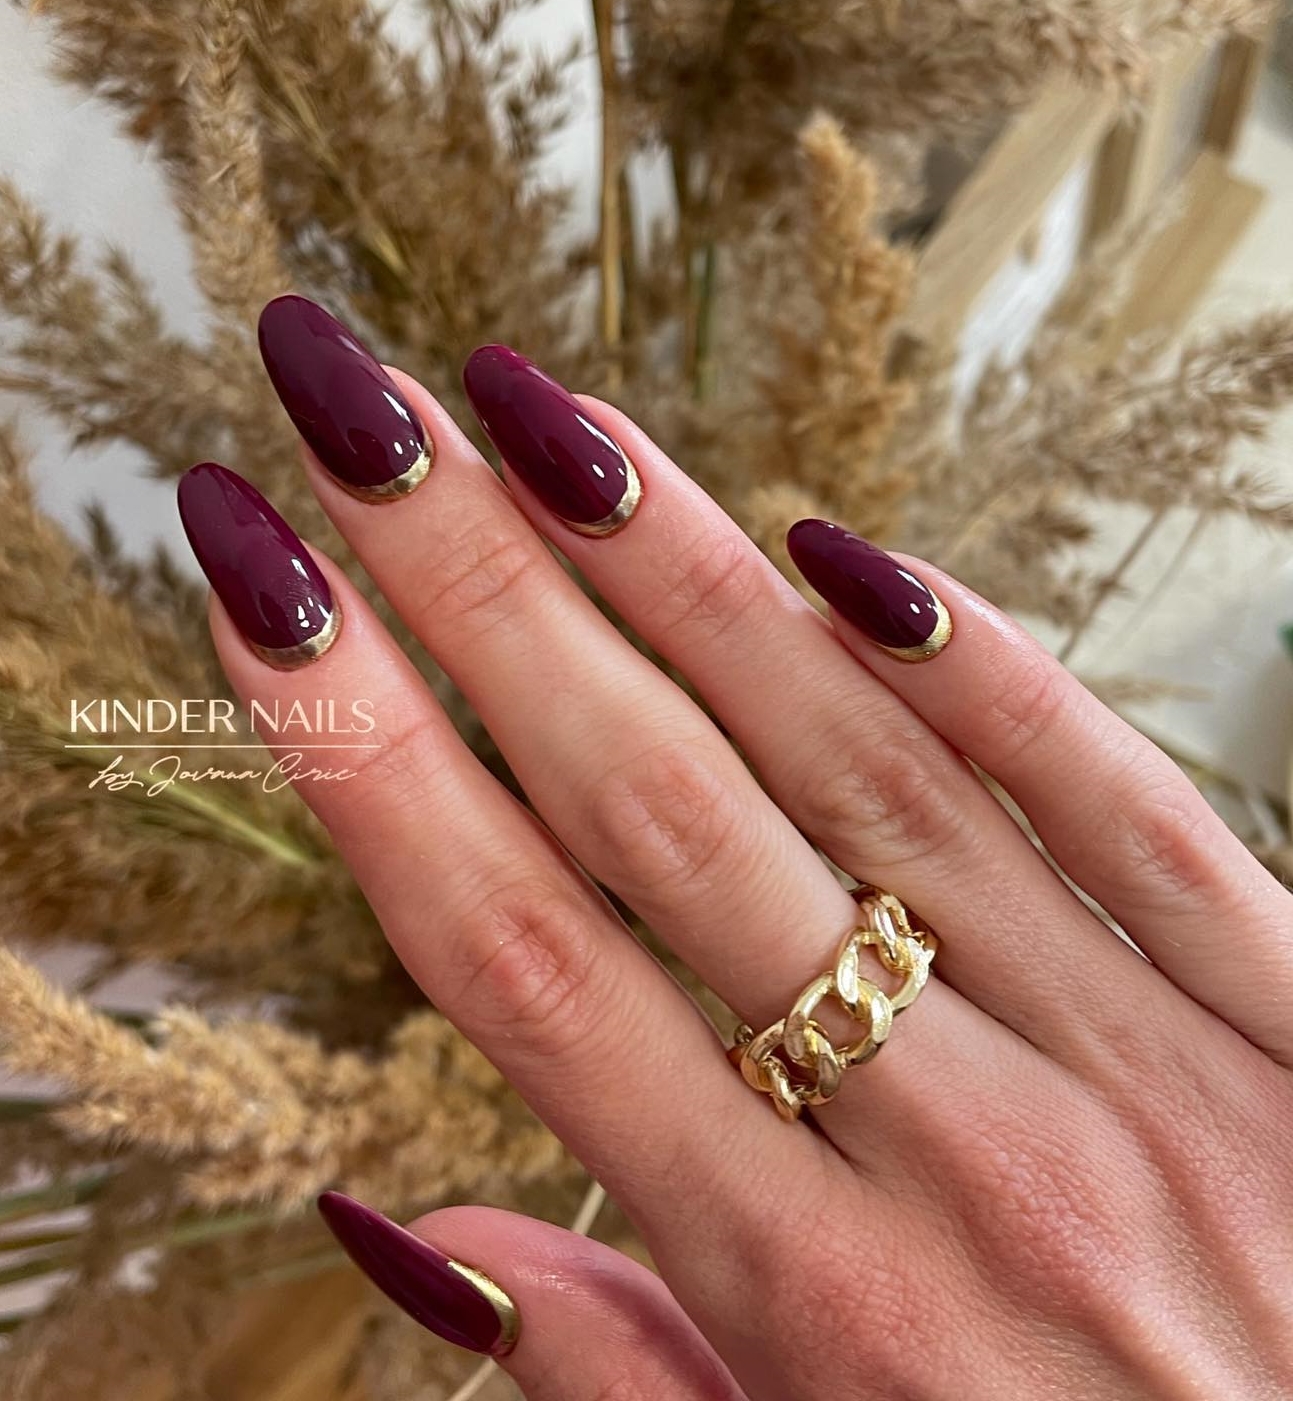 Long Dark Red Color with Chrome Gold Cuticle Area